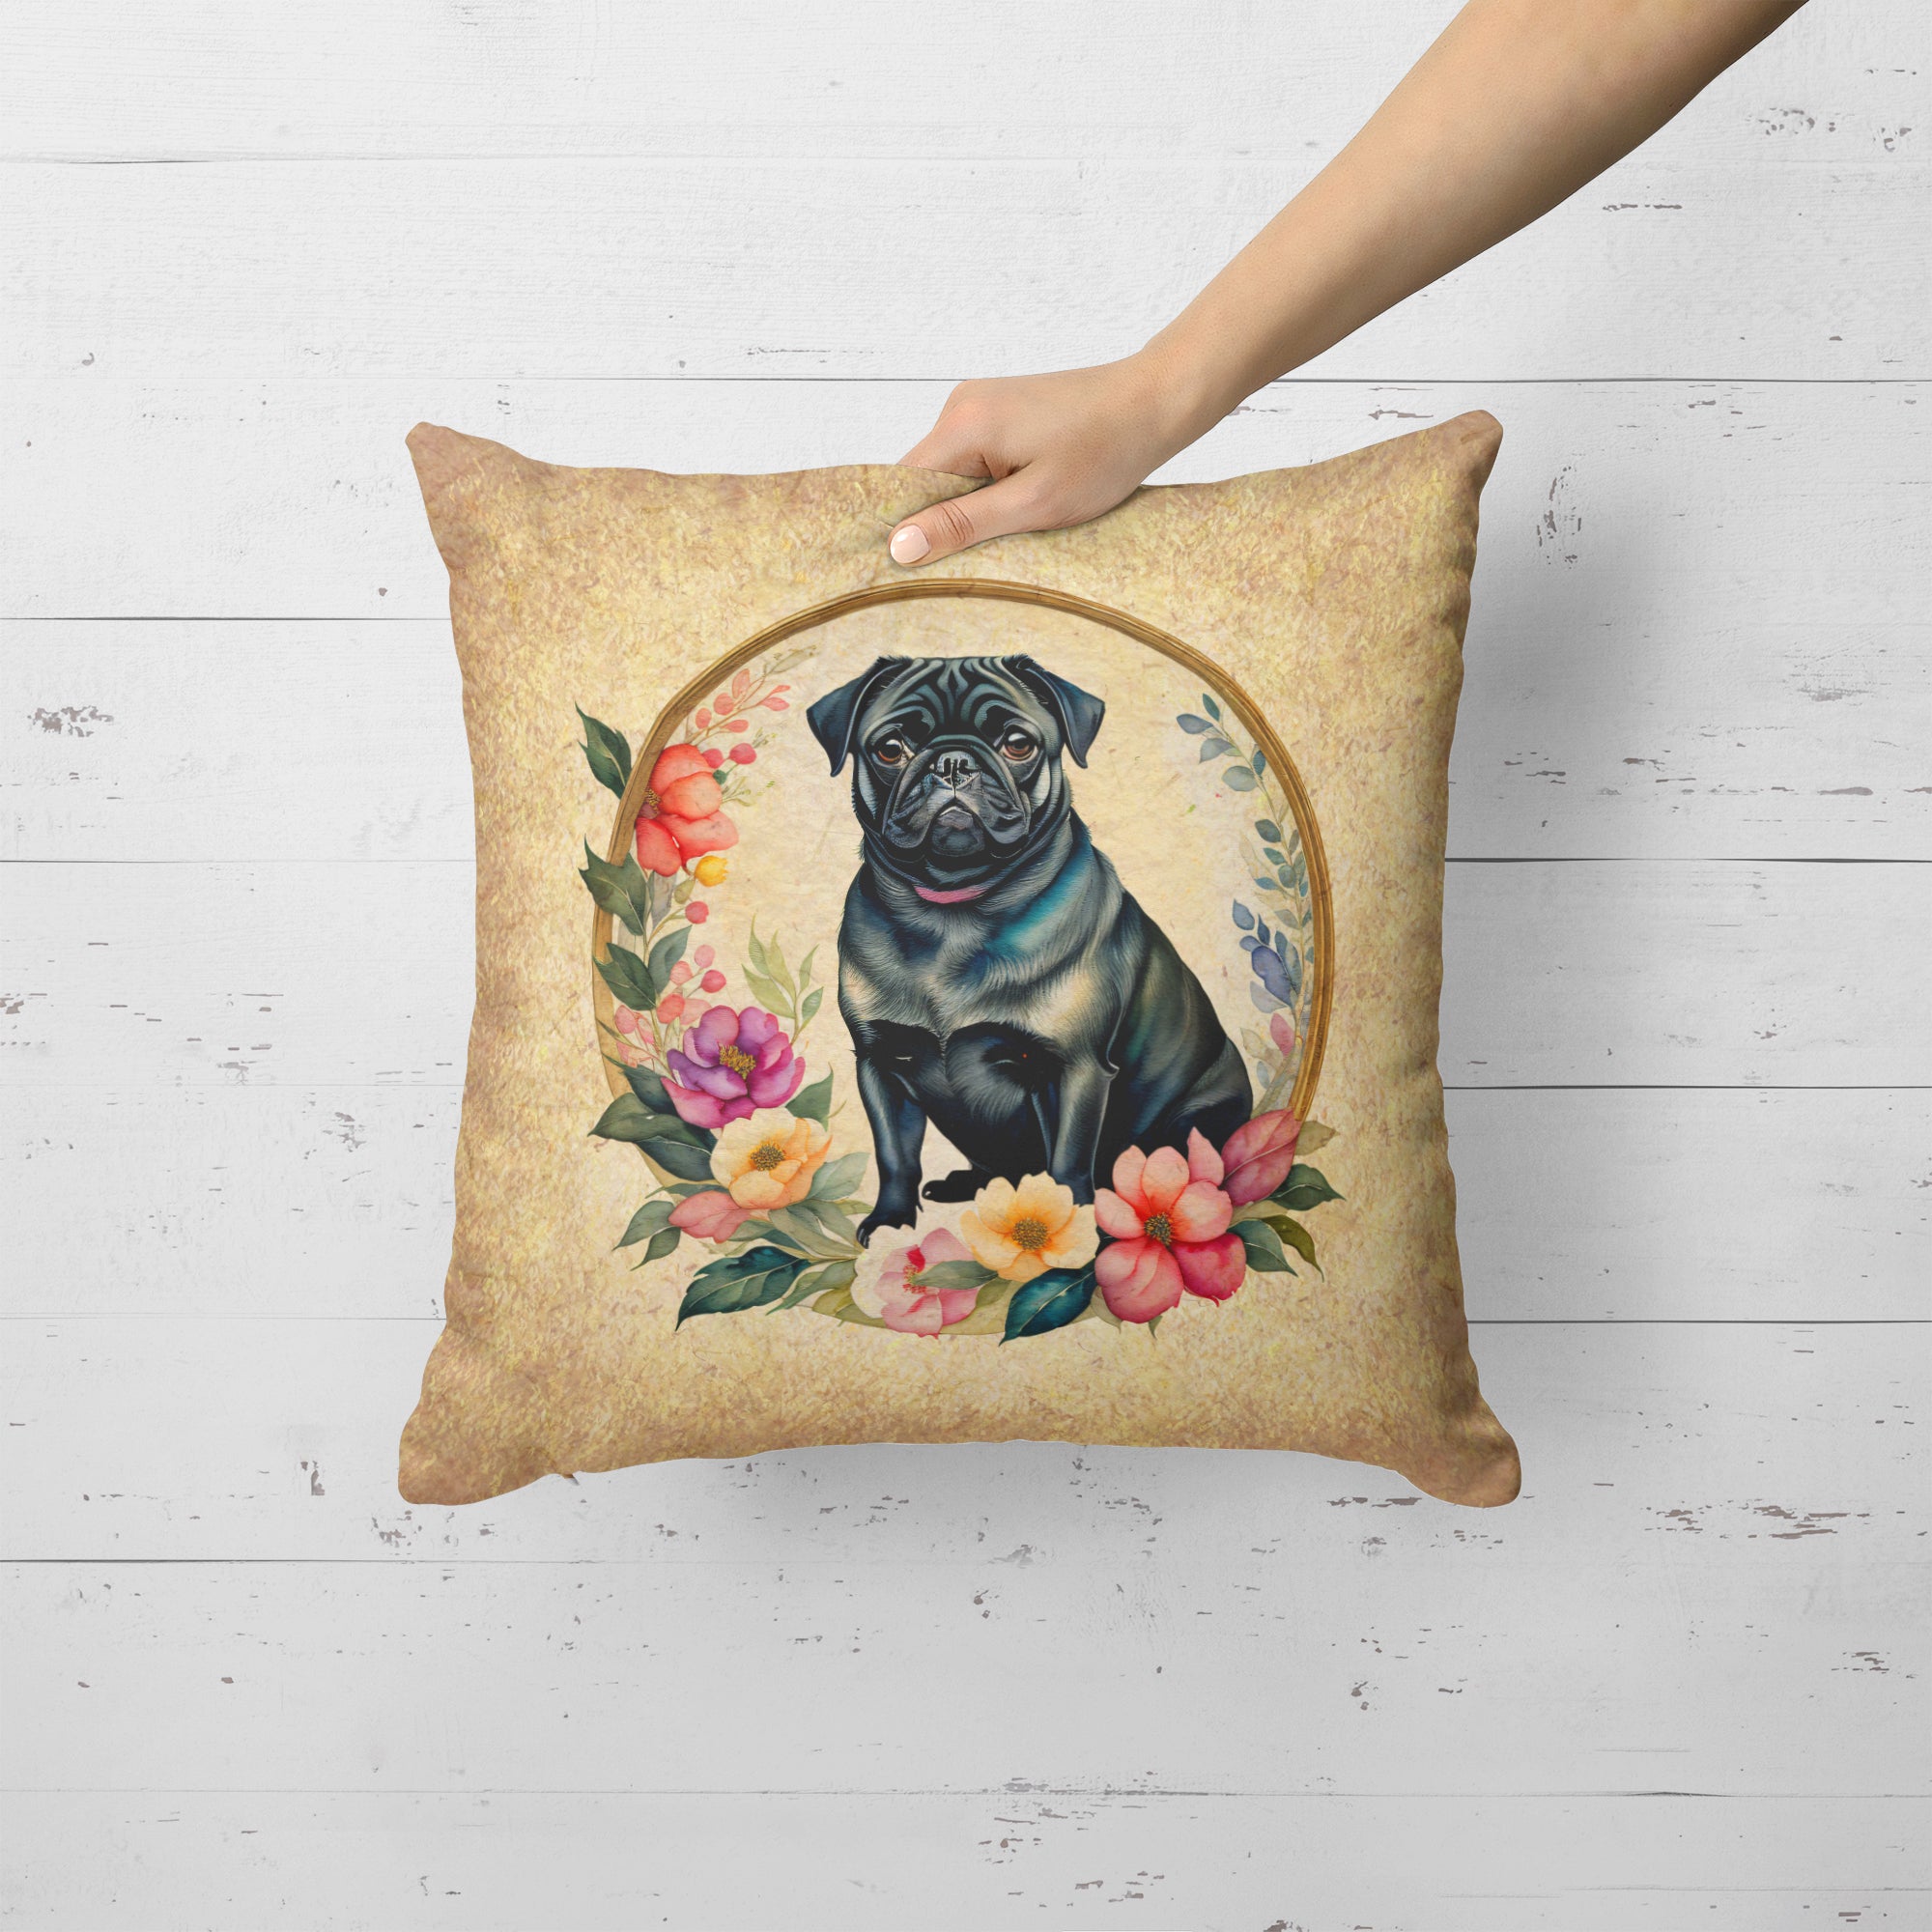 Buy this Black Pug and Flowers Fabric Decorative Pillow